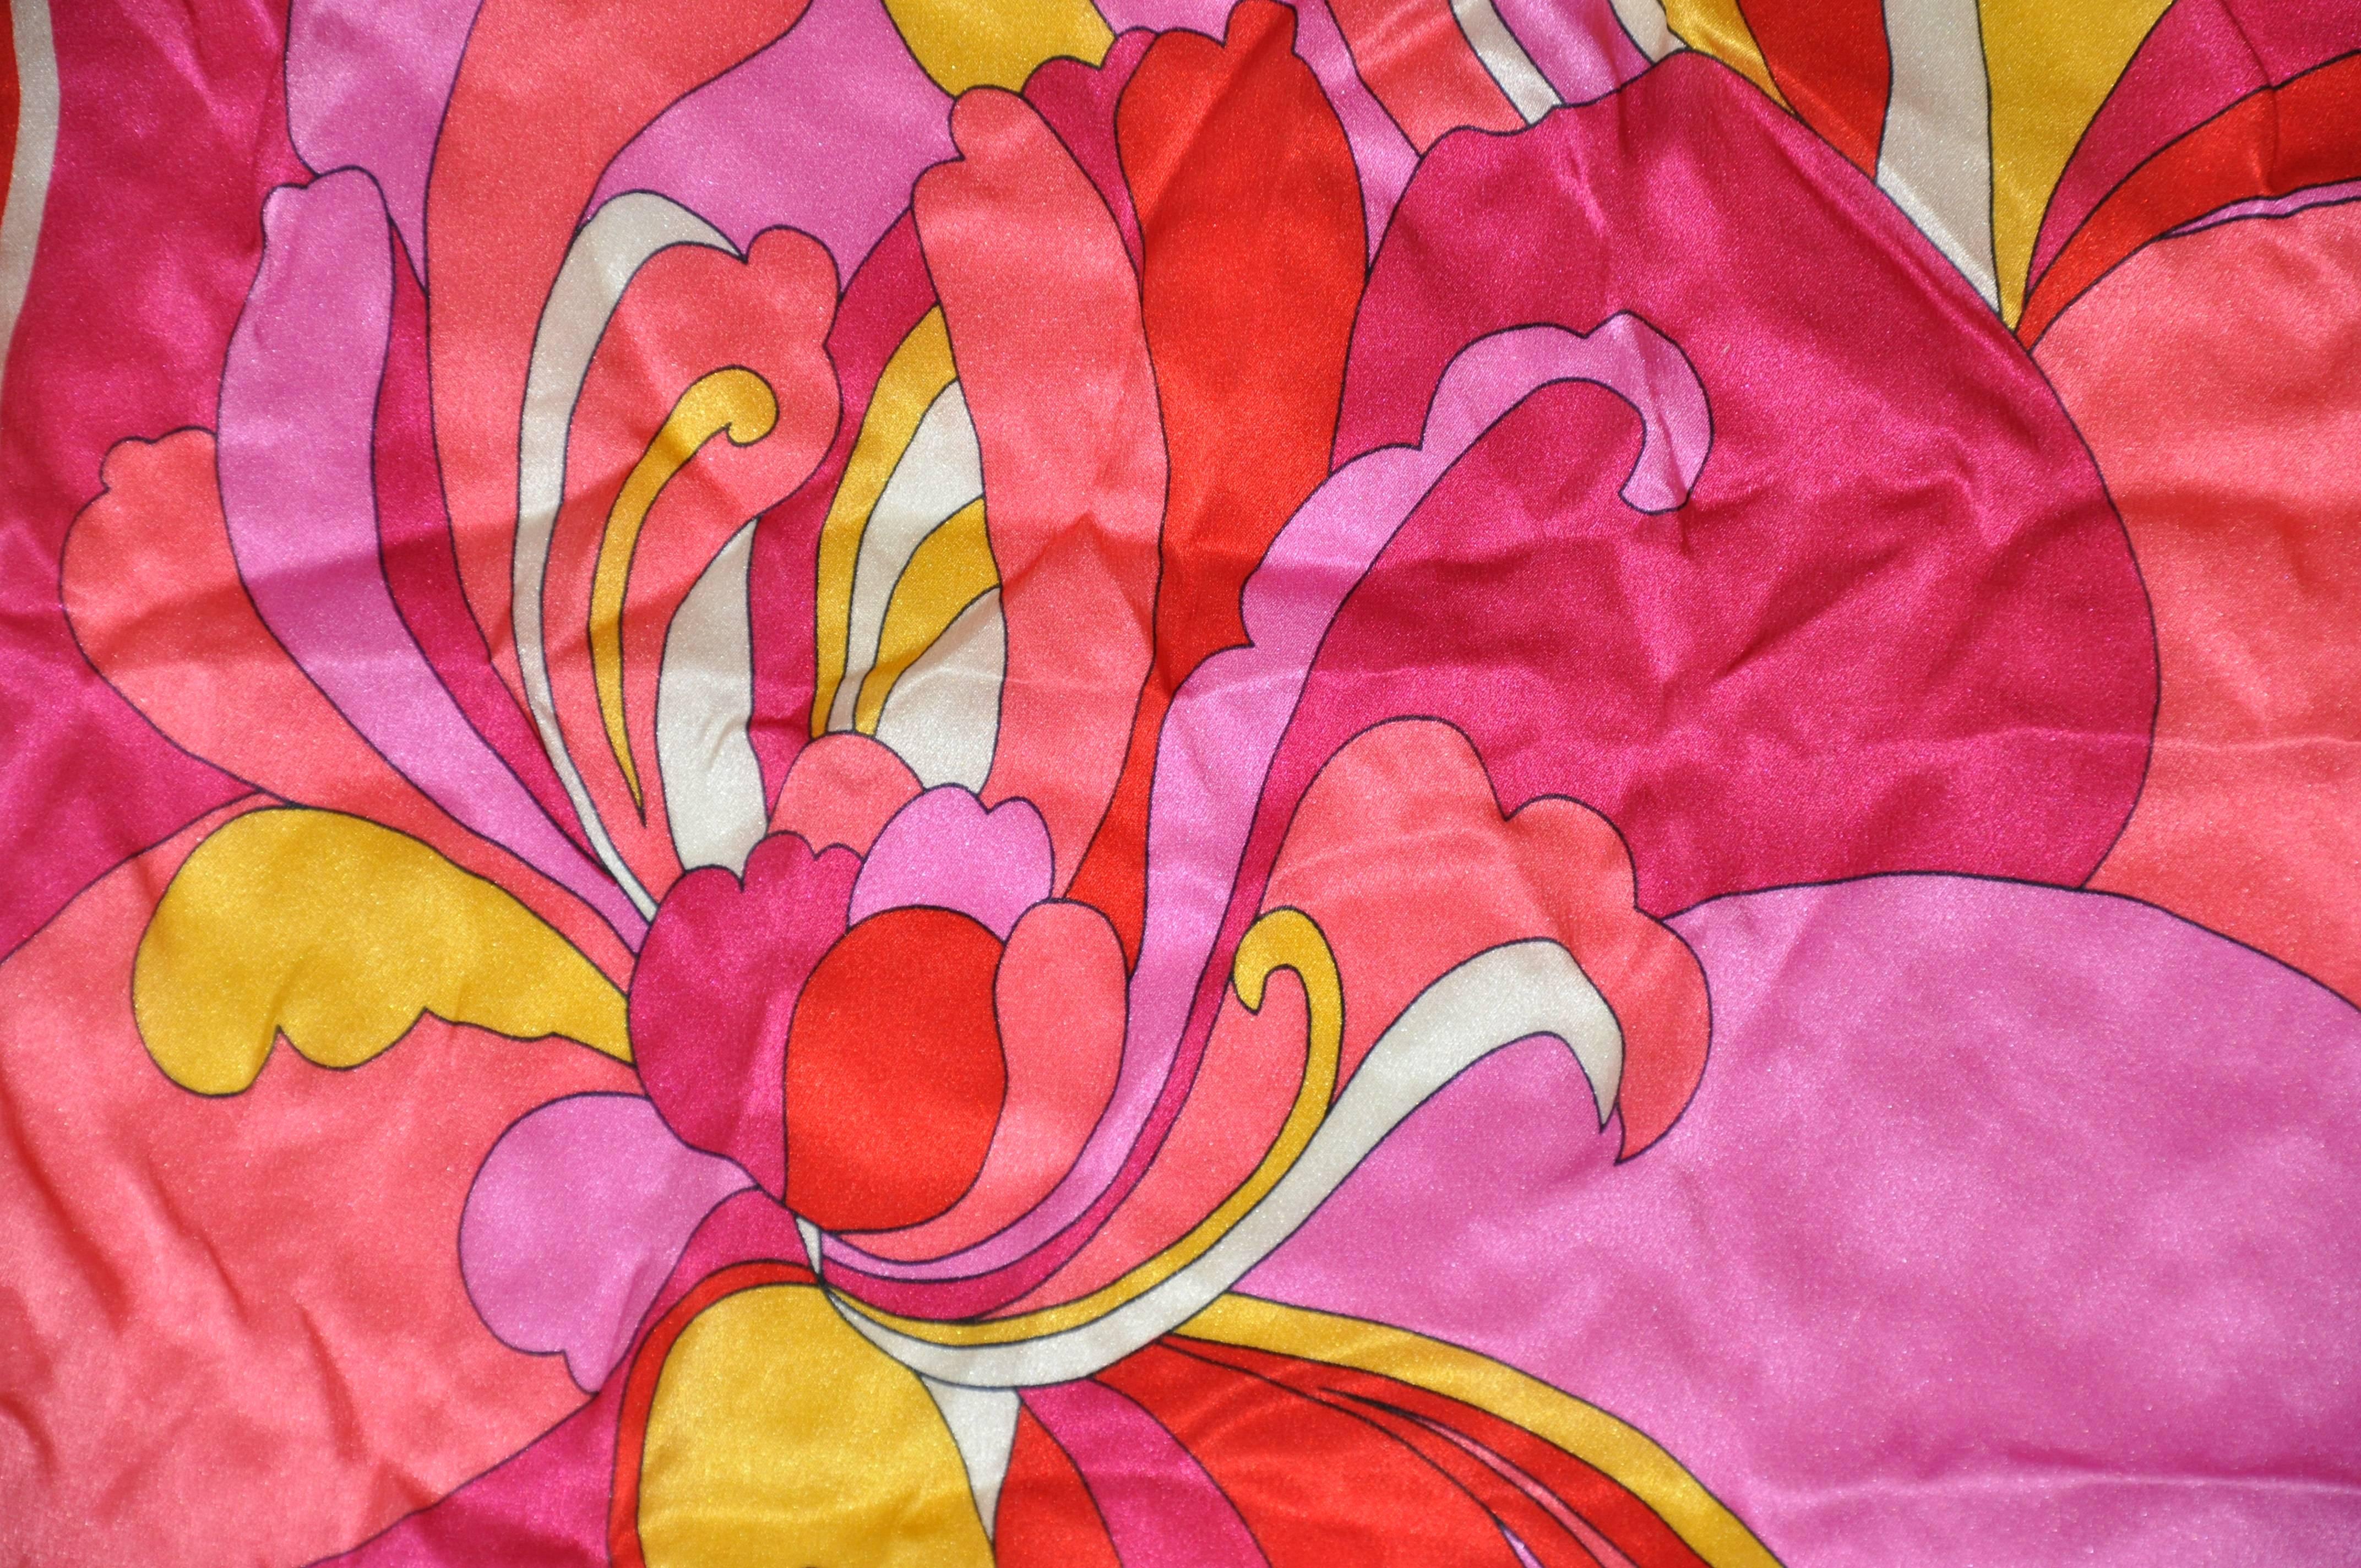 Wonderful vivid colors of reds and fuchsia with white silk scarf measures 21" x 21", and finished with hand-rolled edges. Made in Italy.